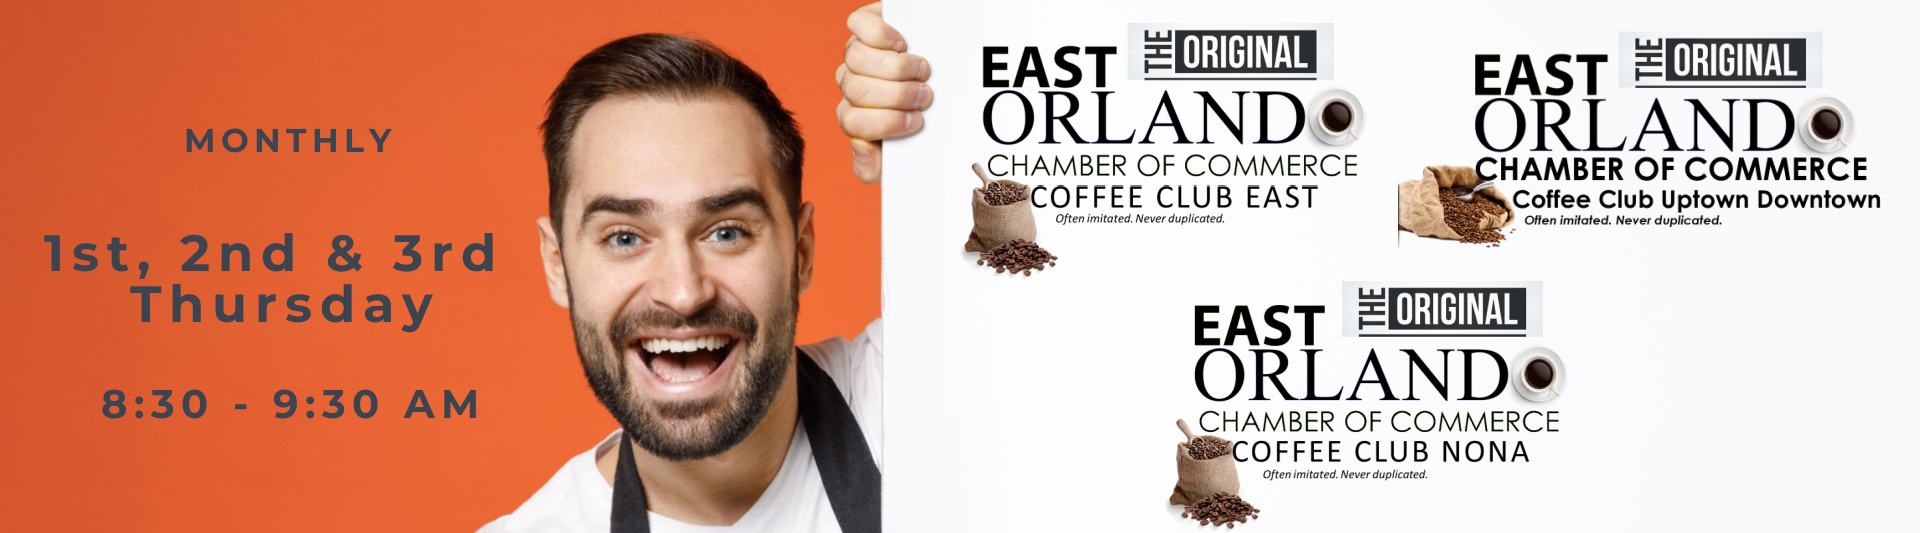 Coffee Club East, Uptown and Nona Promo